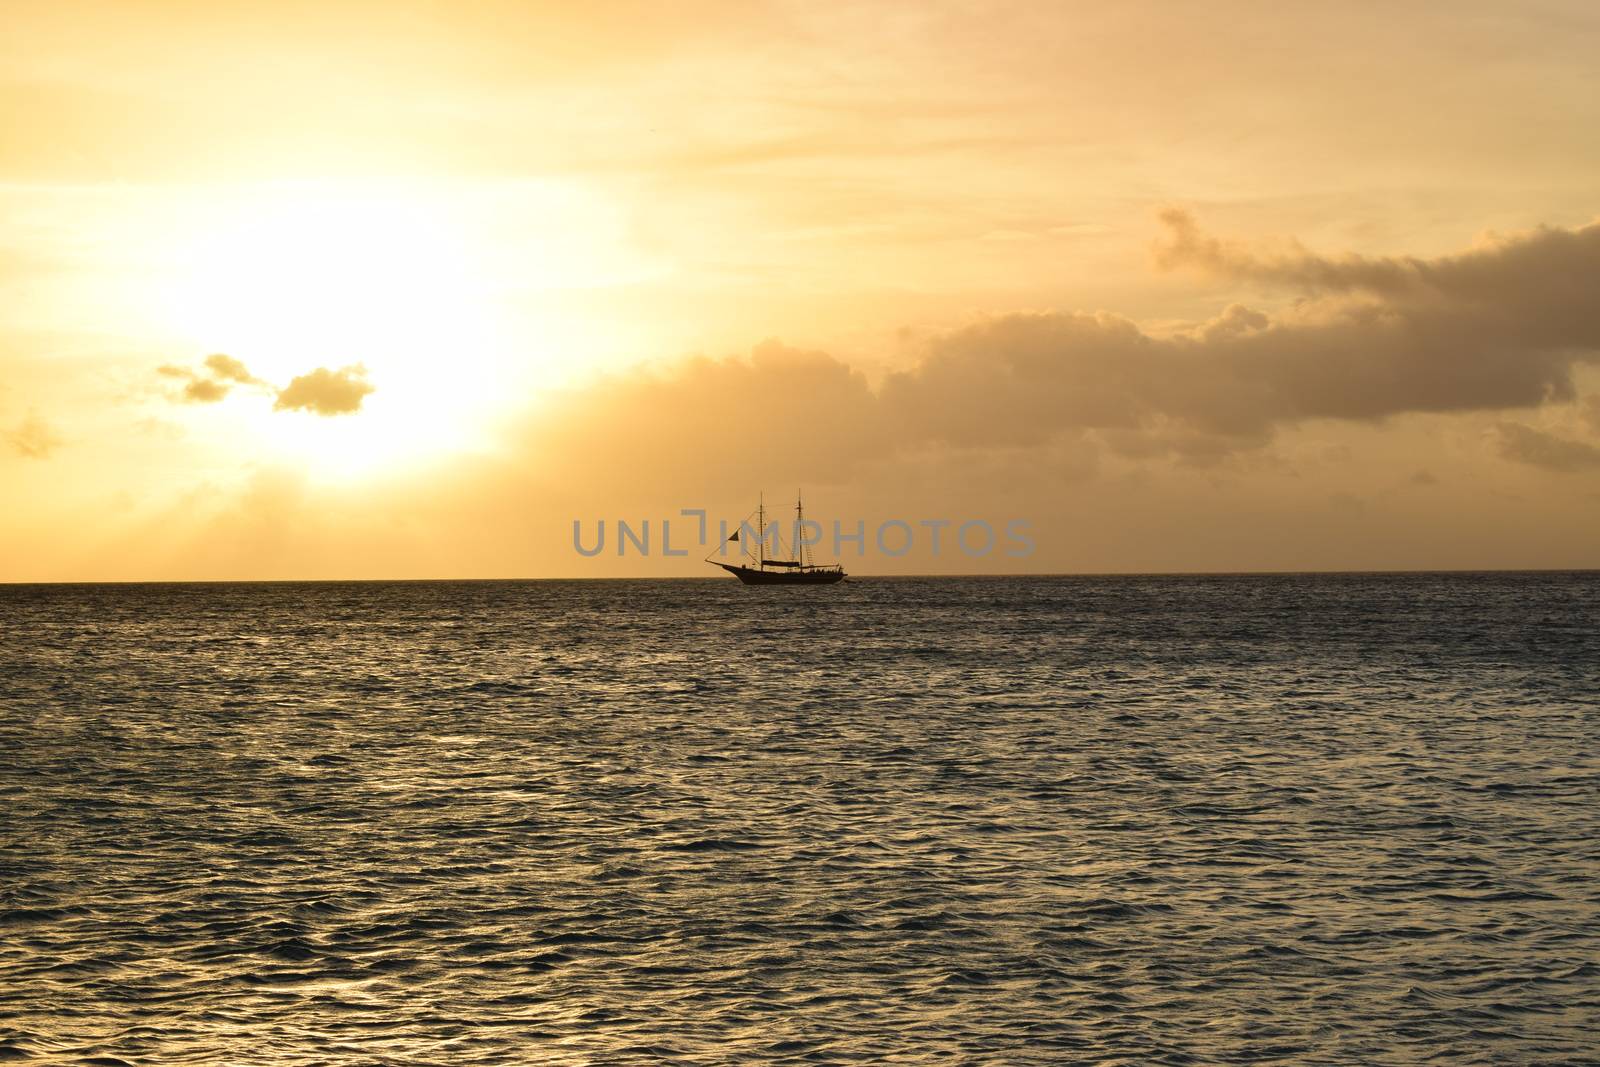 Beautiful golden sunset on the white beach of Aruba with turquoise water